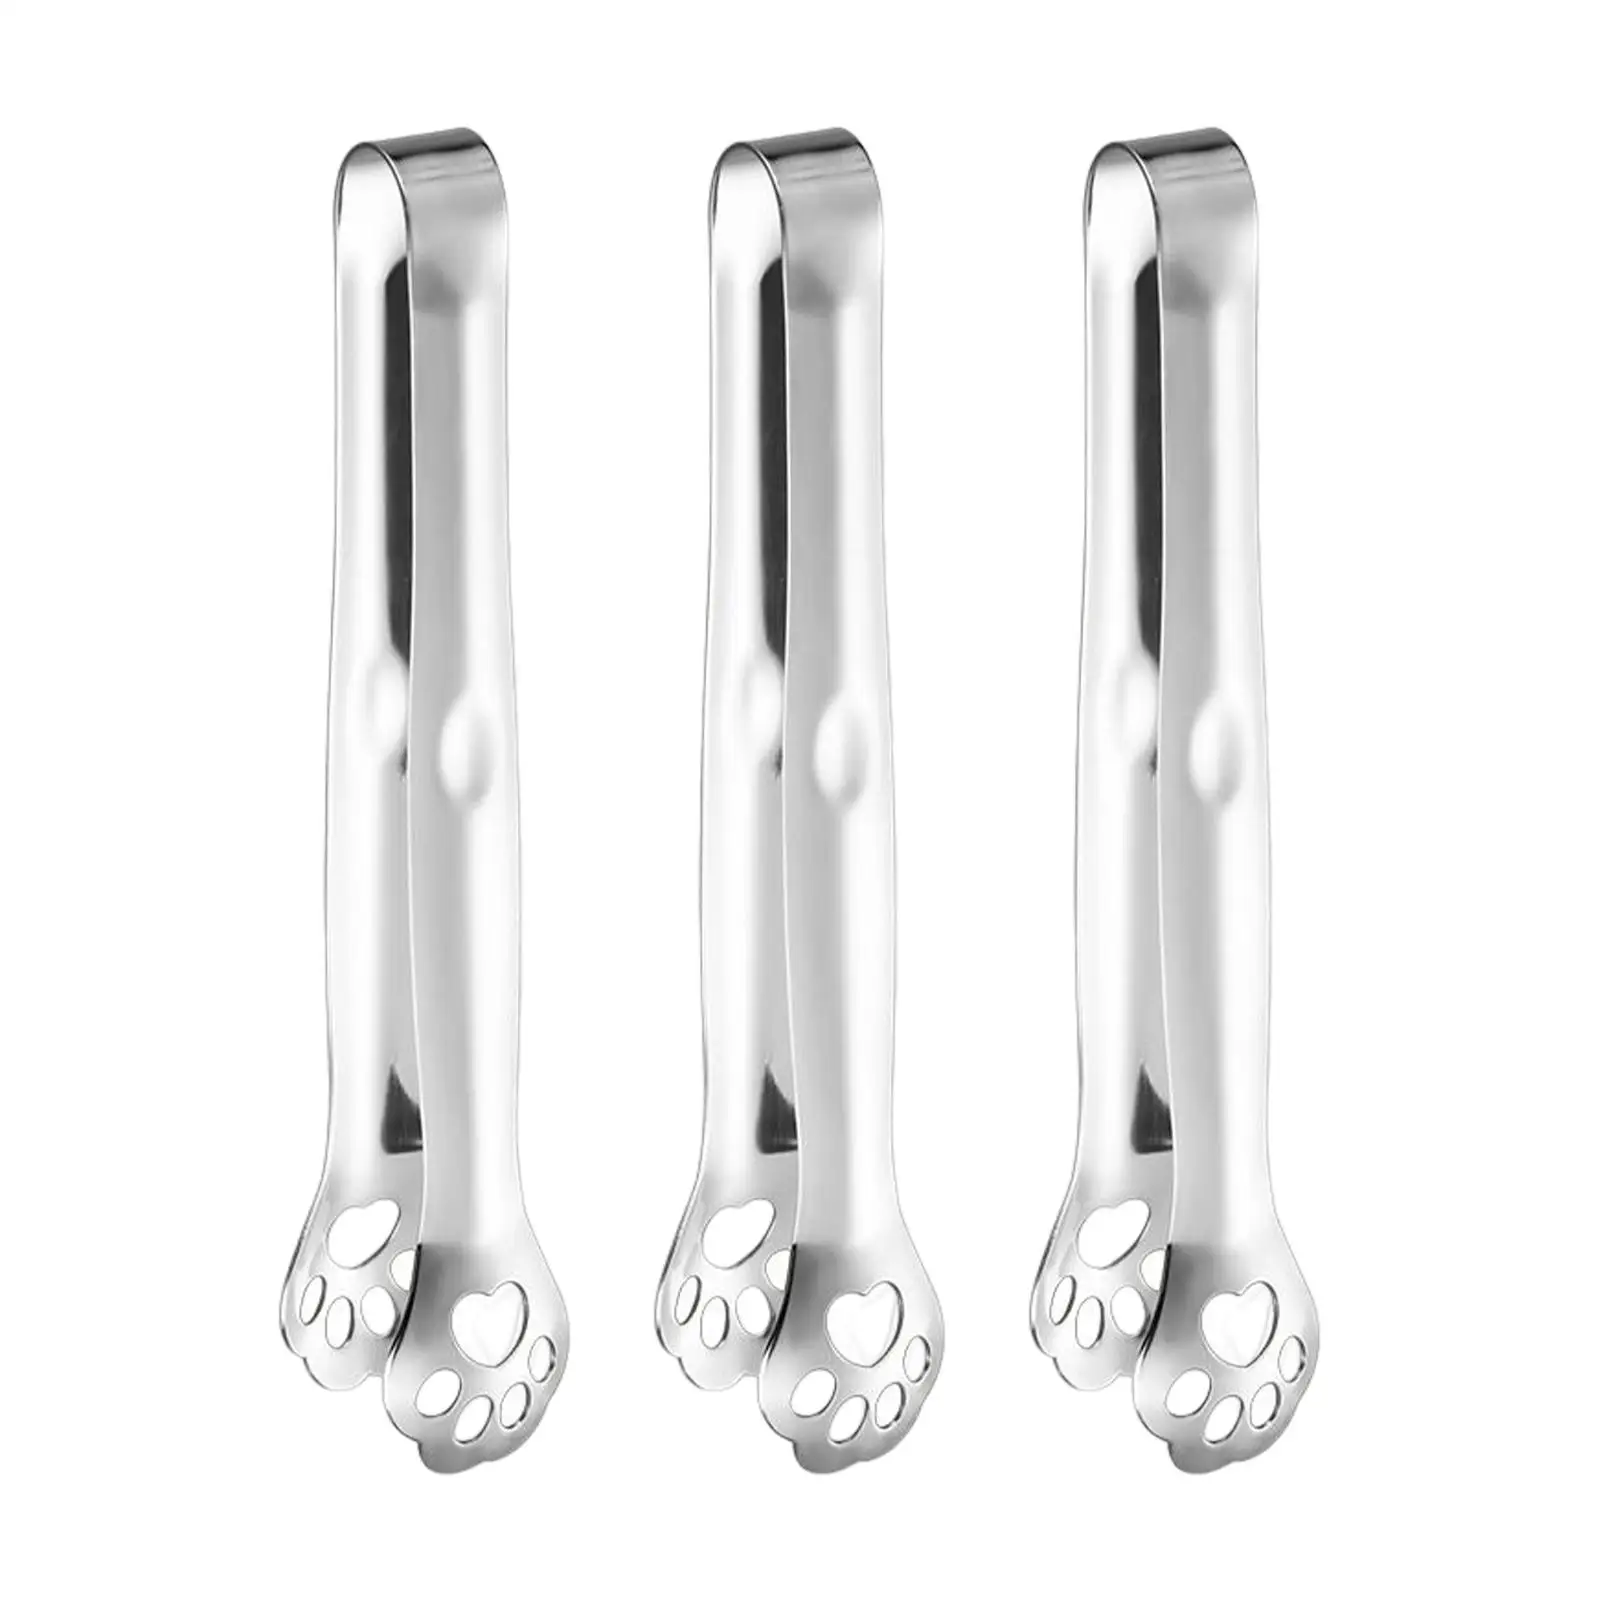 3x Stainless Steel Food Clips Roast Clip Buffet Clip Serving Bar Baking Bread Clamp for Grilling Cooking Frying Baking BBQ